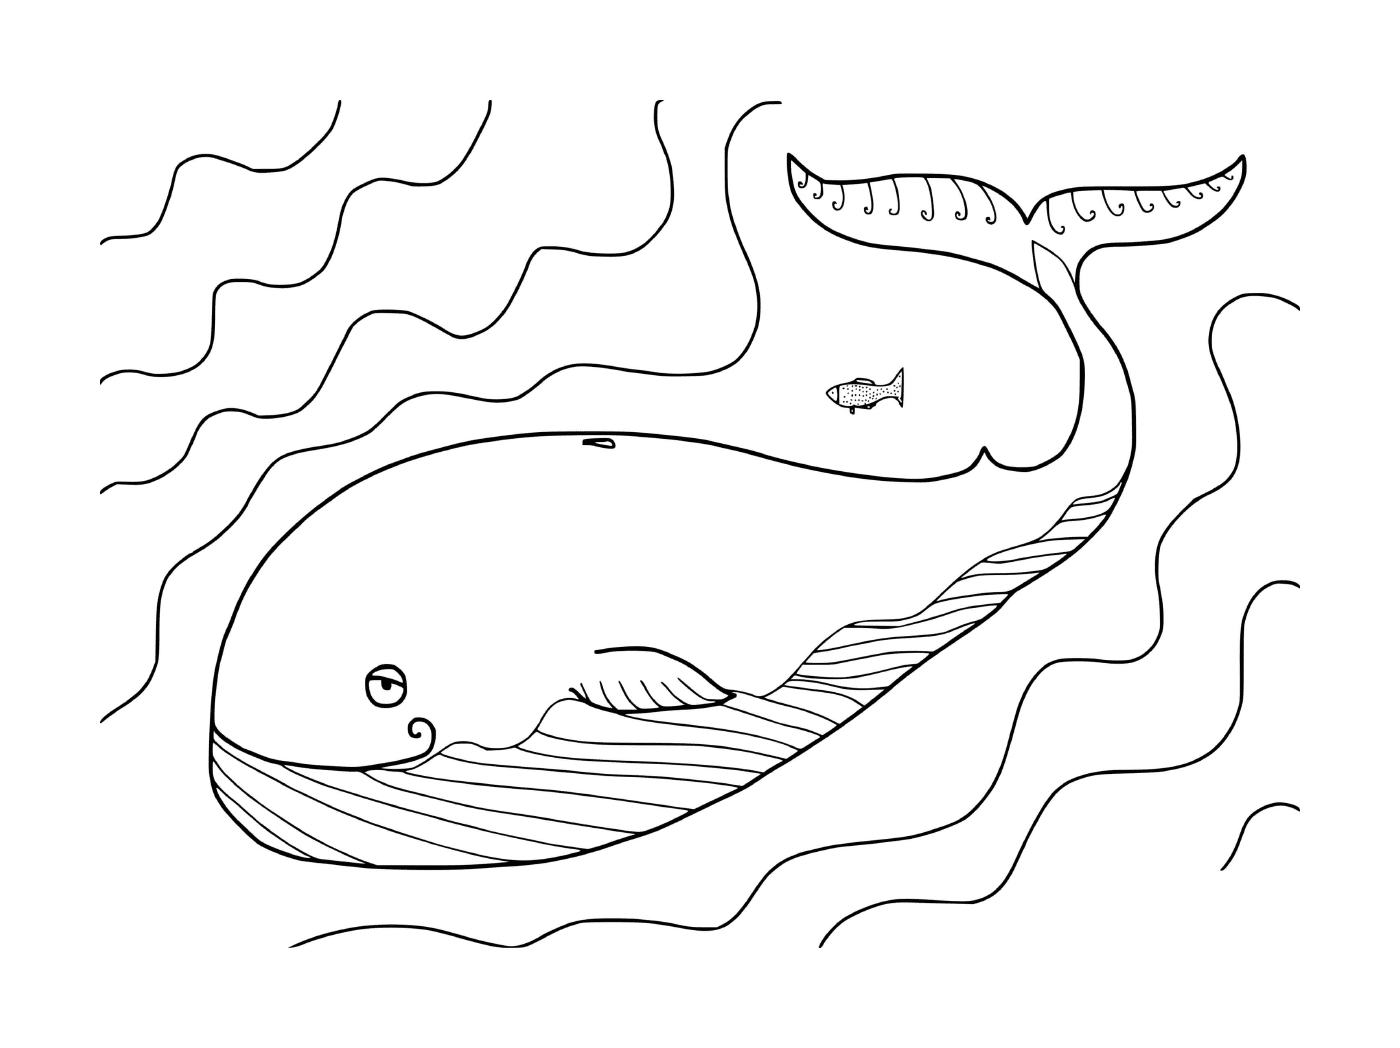  a whale and a fish 